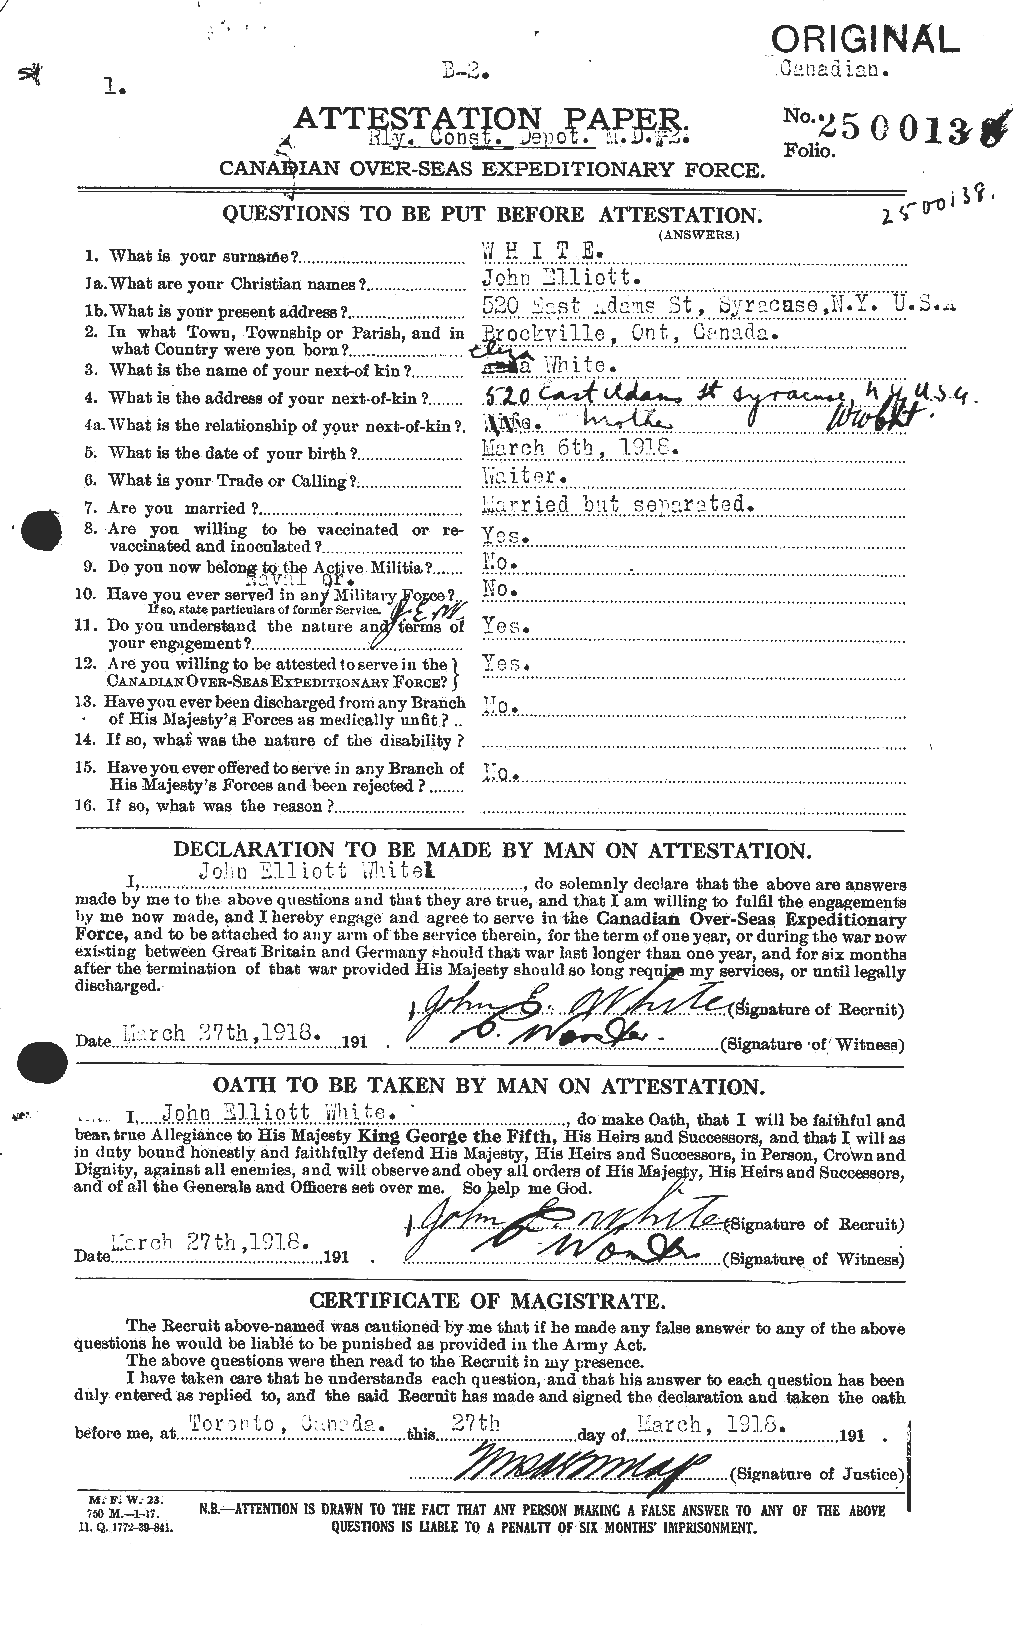 Personnel Records of the First World War - CEF 671554a